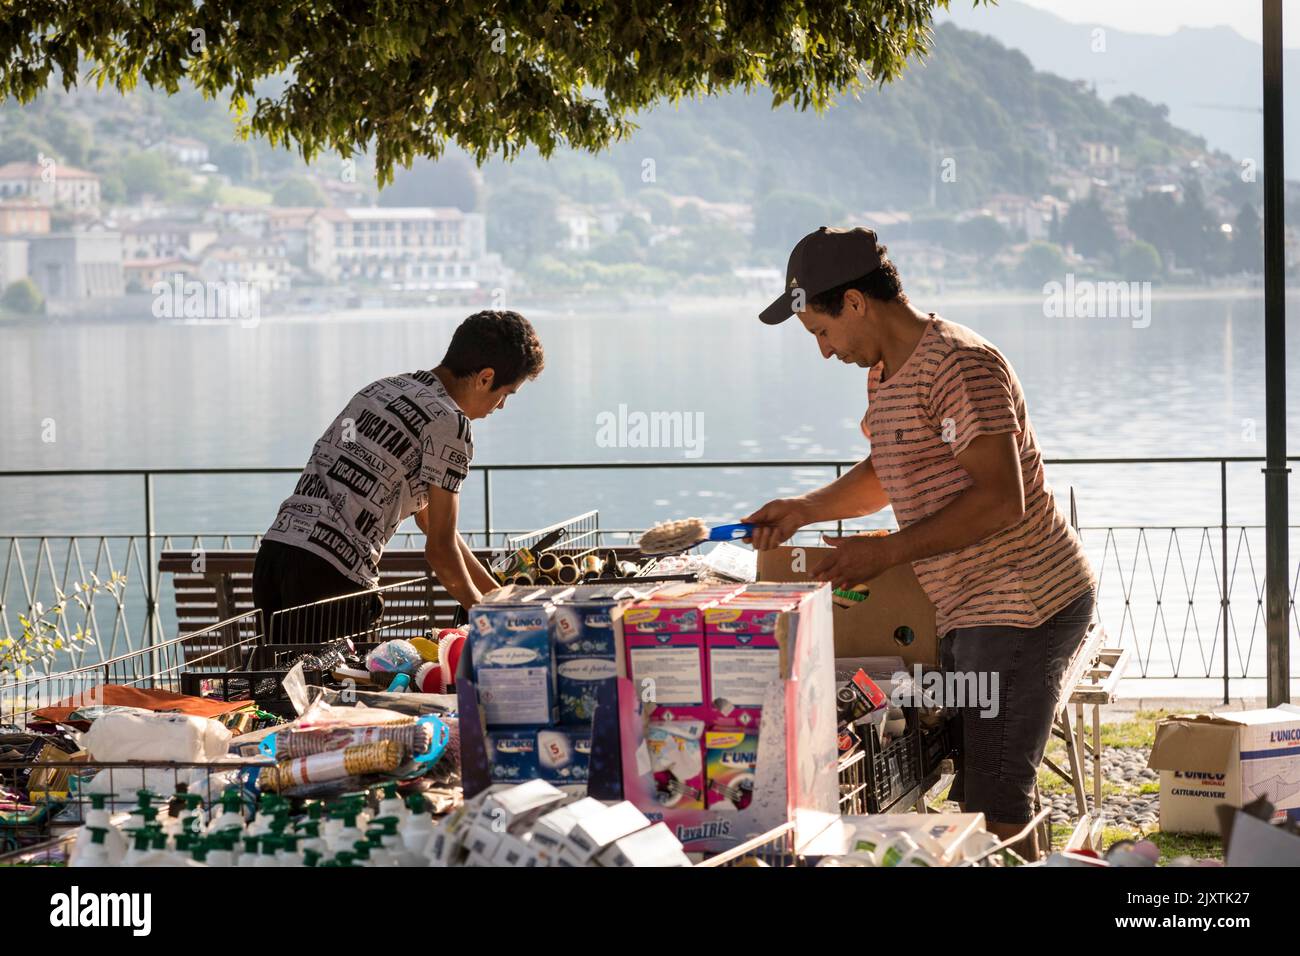 Market traders layout their stall of household goods alongside Lake Como, Italy Stock Photo